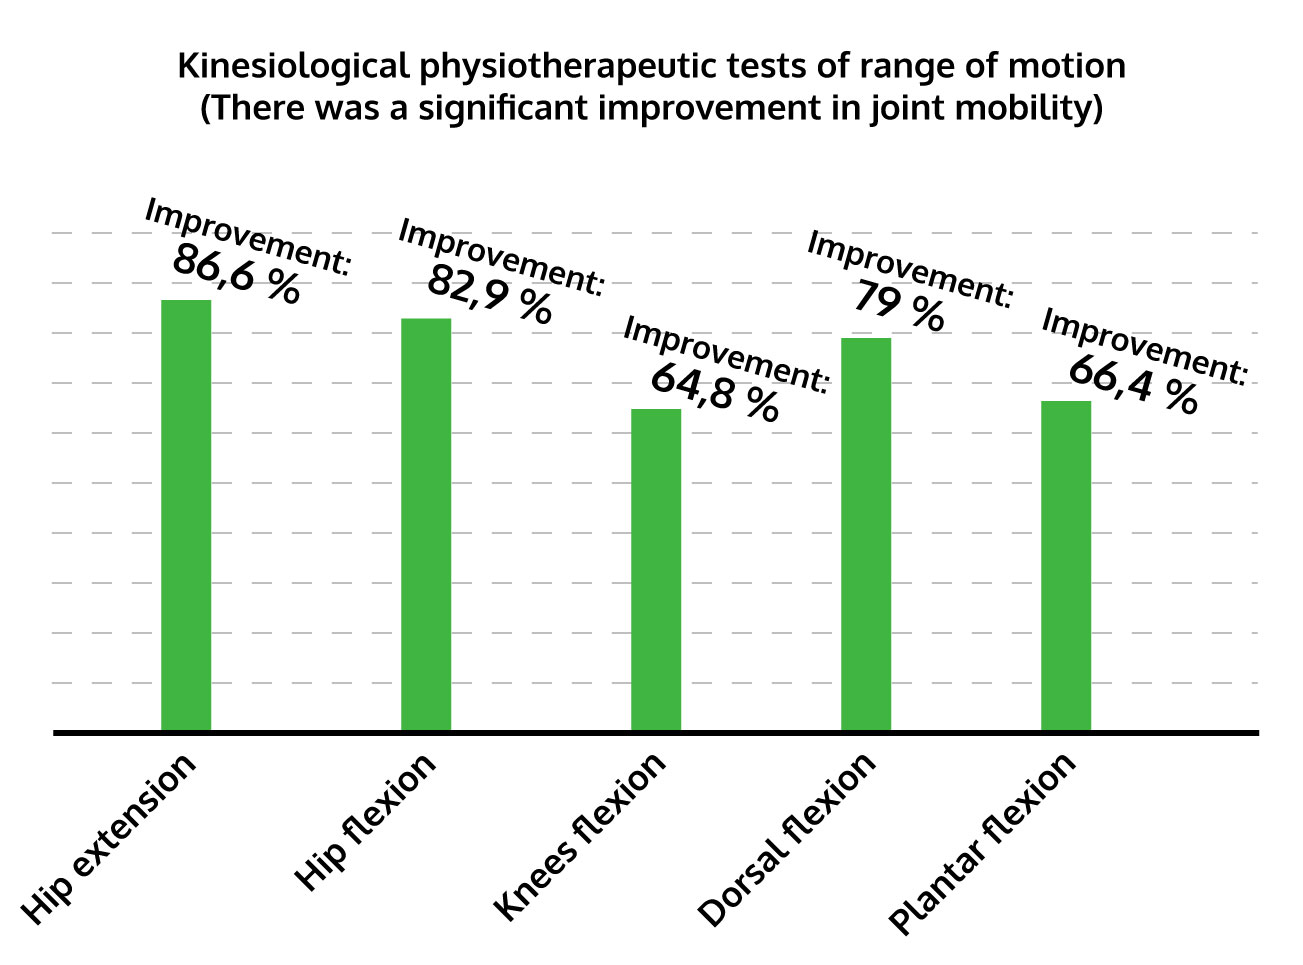 Kinesiological physiotherapeutic tests of range of motion (There was a significant improvement in joint mobility)